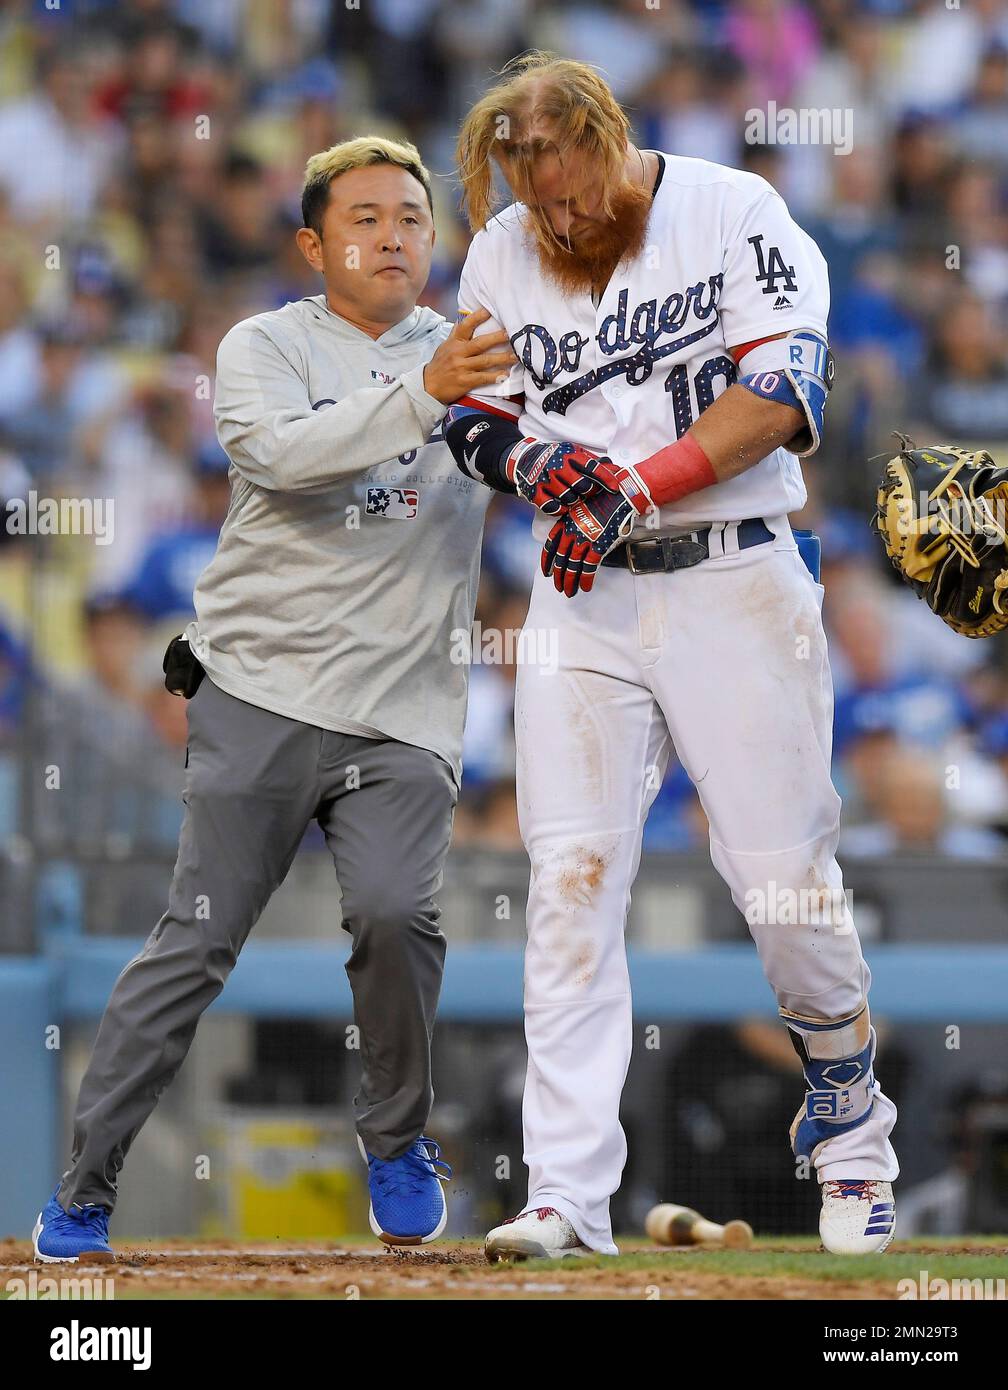 Justin Turner exits game after being hit by pitch